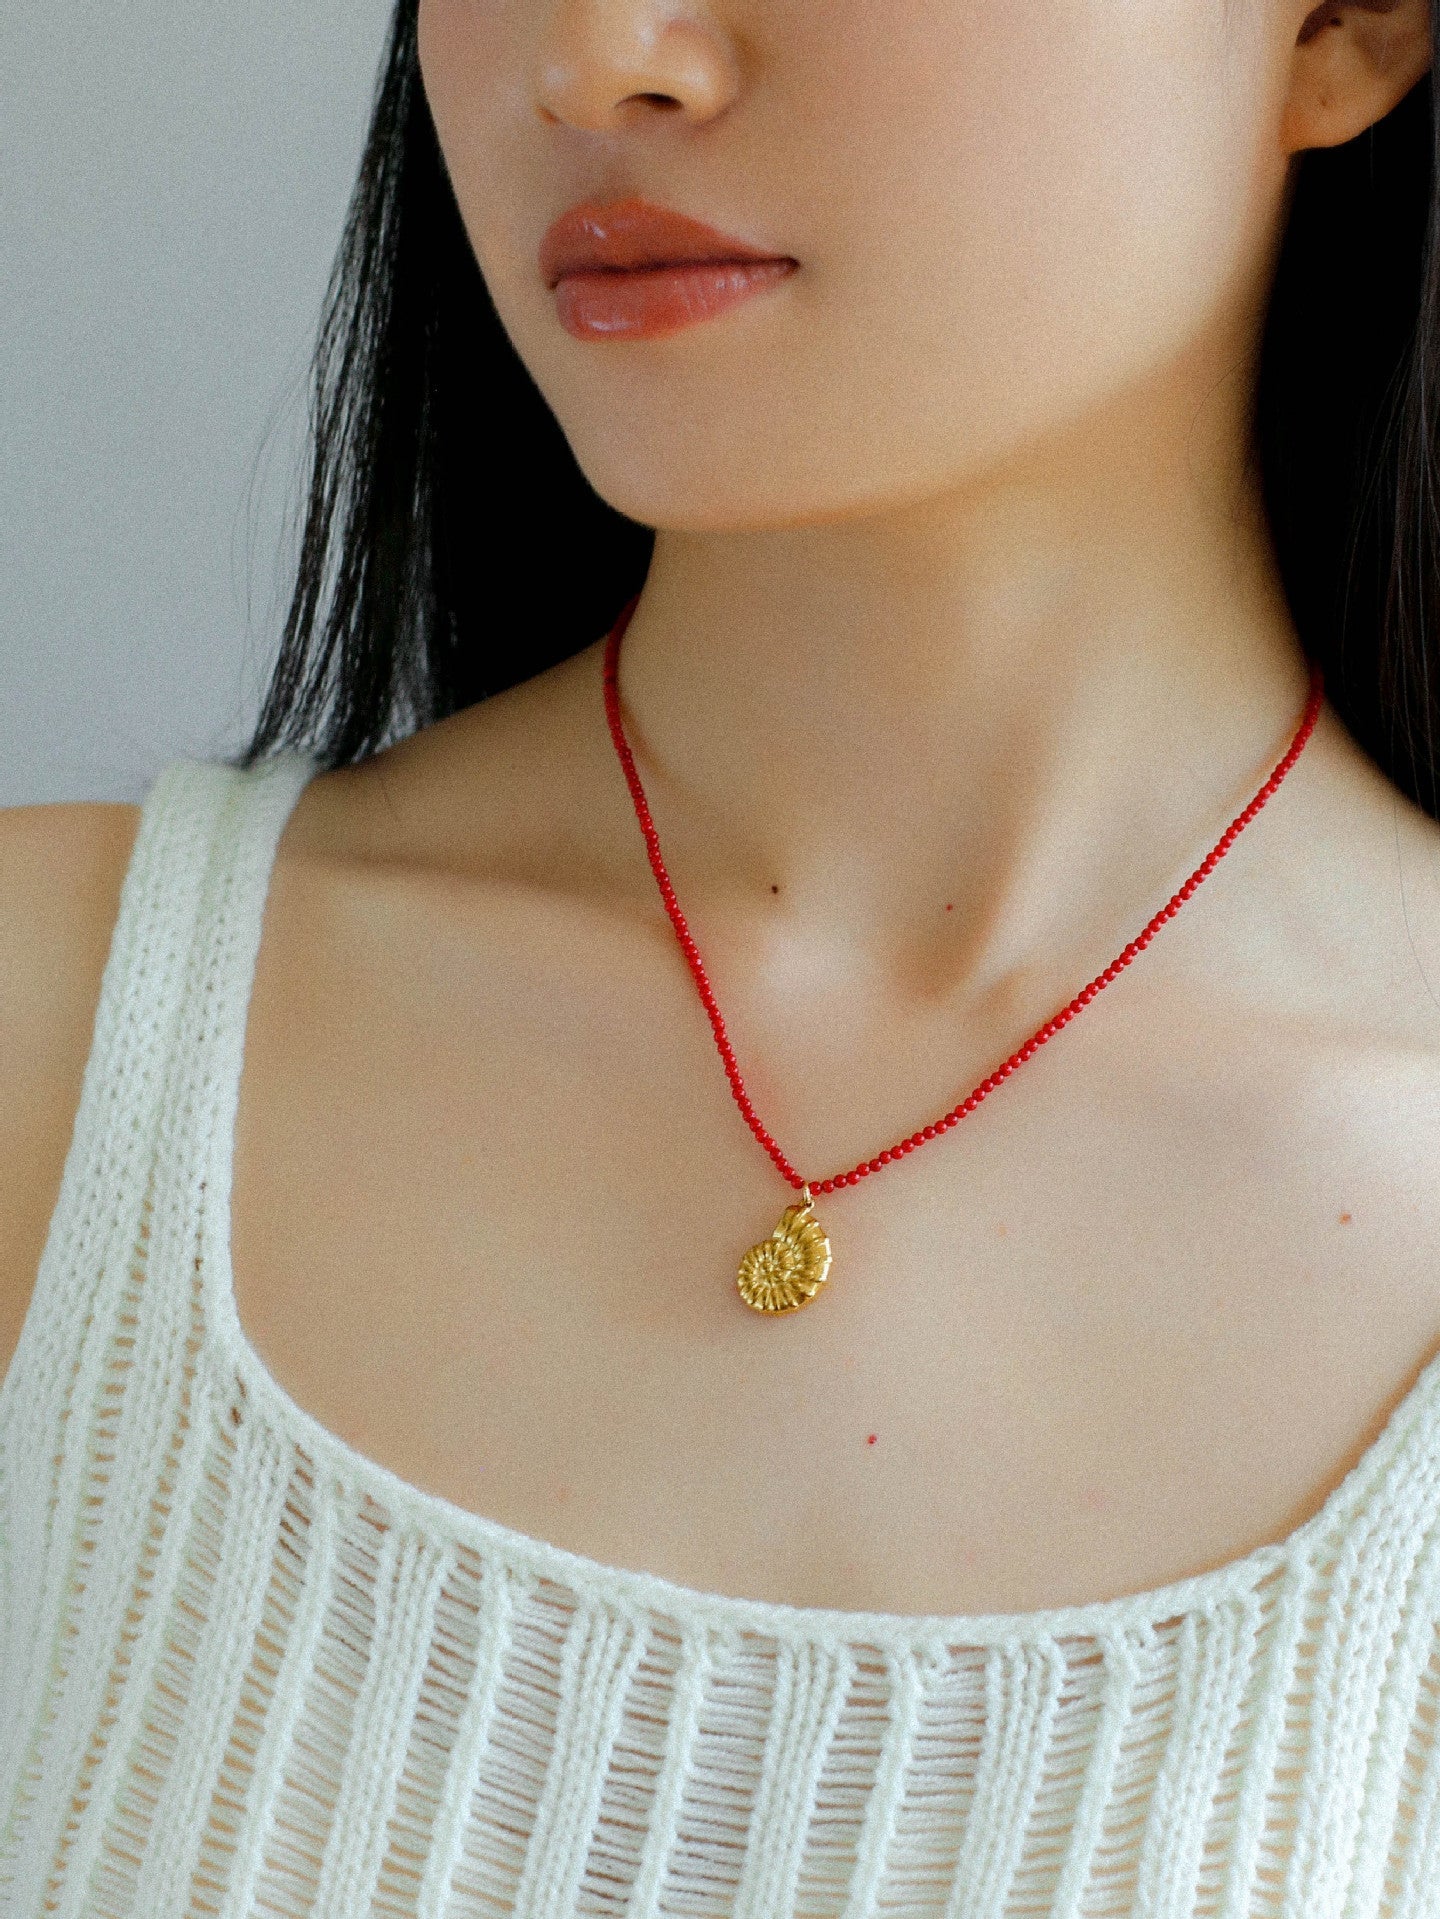 Mini Red Coral Beaded Necklace with Conch Pendant - floysun